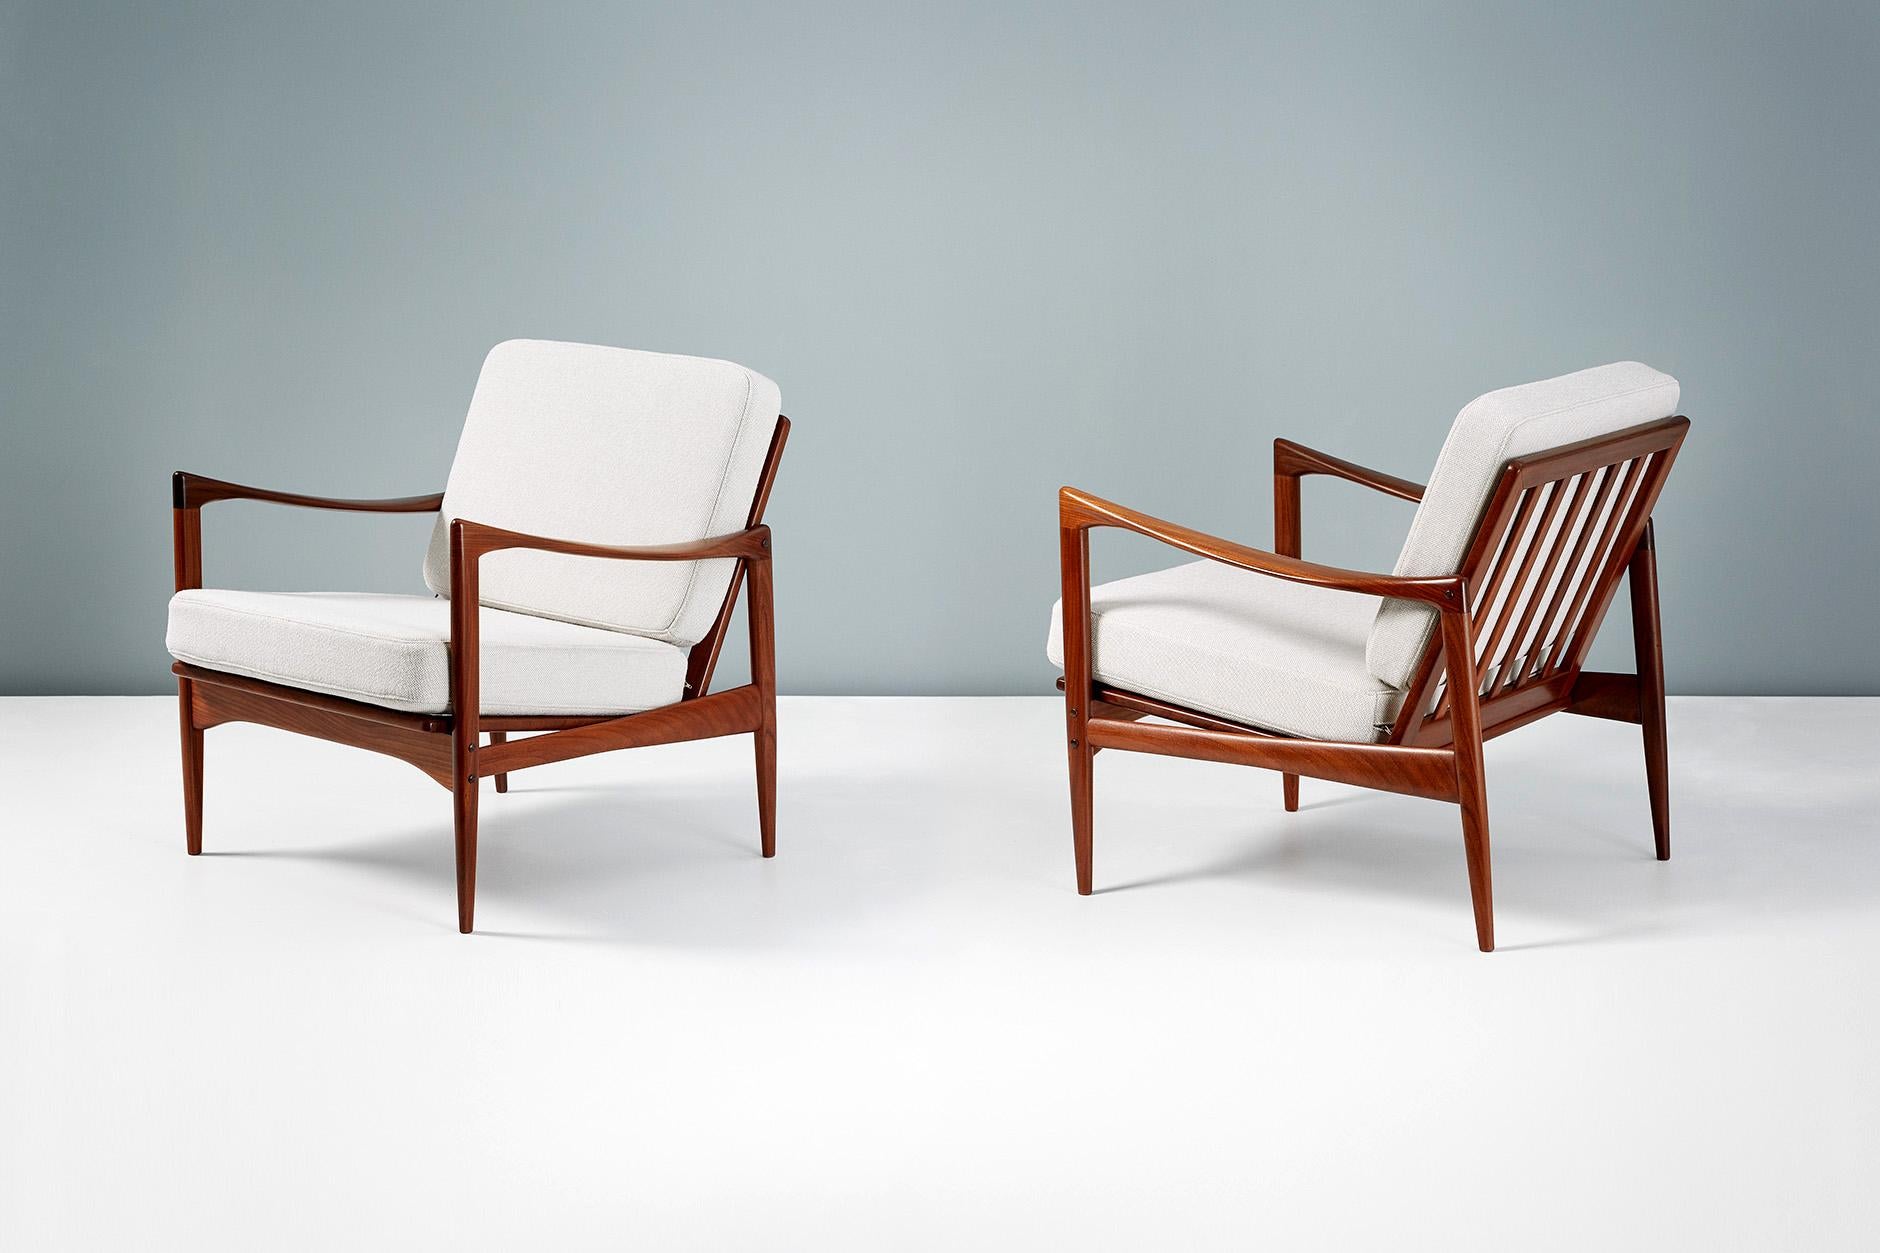 A pair of Afromosia African teak 'Kandidaten', (Candidate), lounge chairs produced by Olof Perssons Fatoljindustri (O.P.E.) in Jonkoping, Sweden circa 1960. 

Danish master Ib Kofod-Larsen gained popularity in his native Denmark in the 1950s via